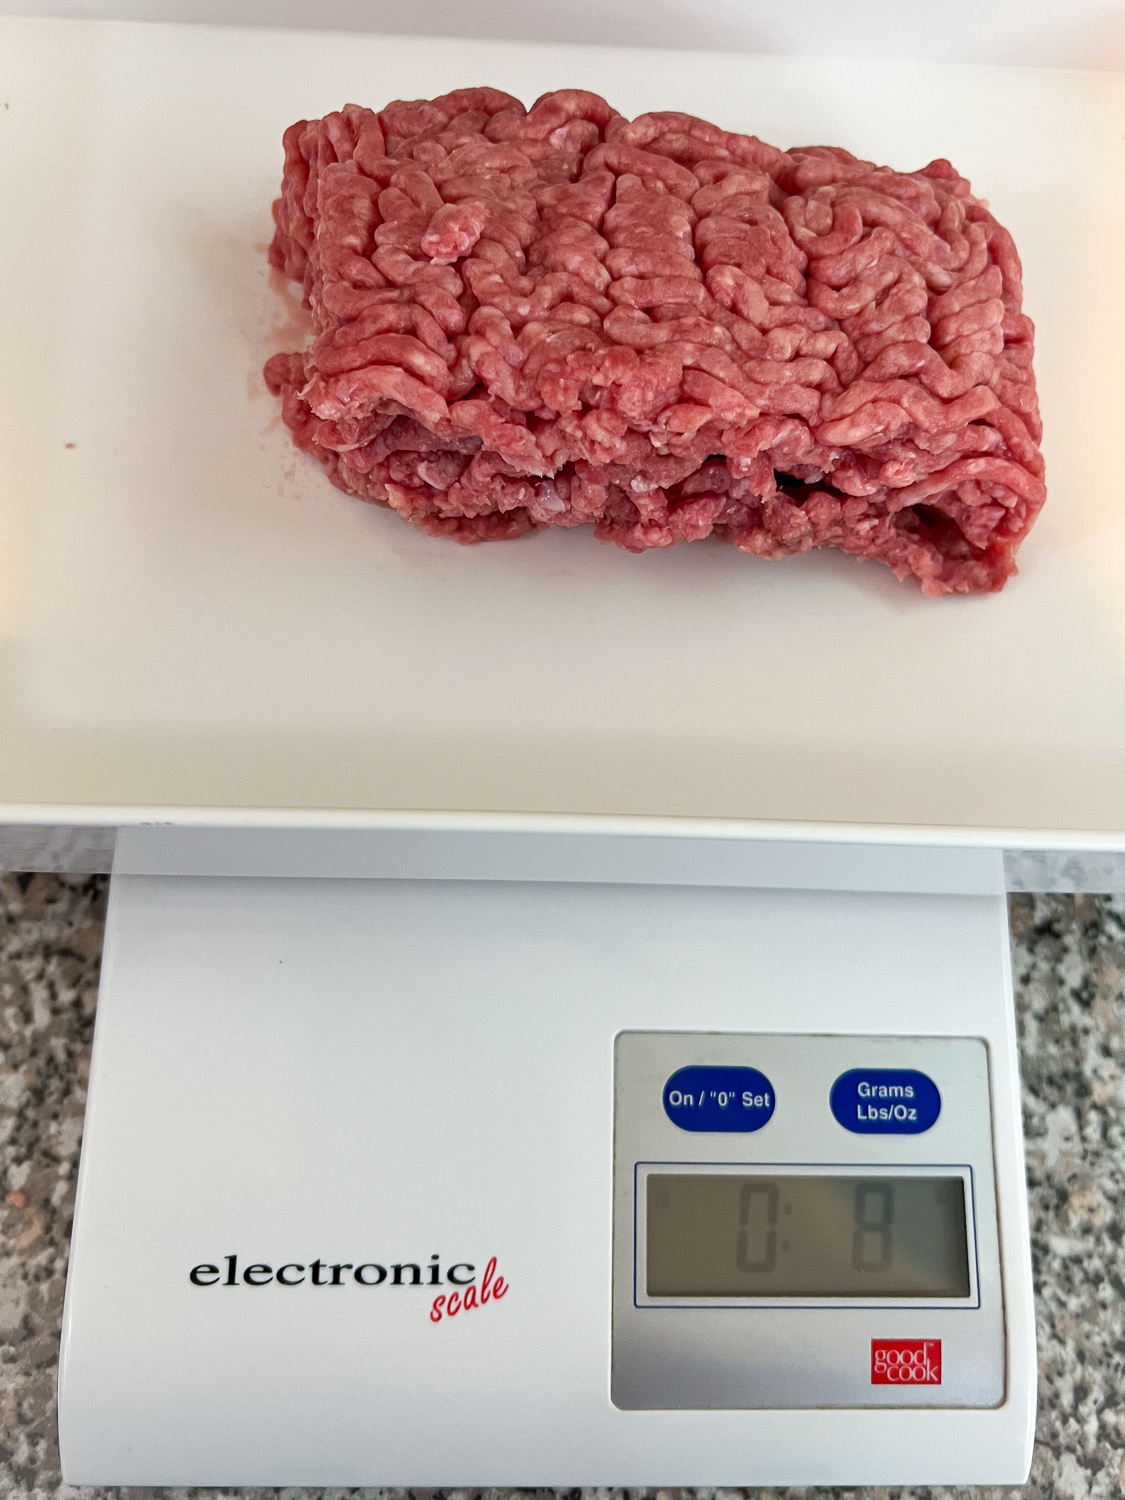 Ground beef on a kitchen scale registering 8 oz or a half pound.